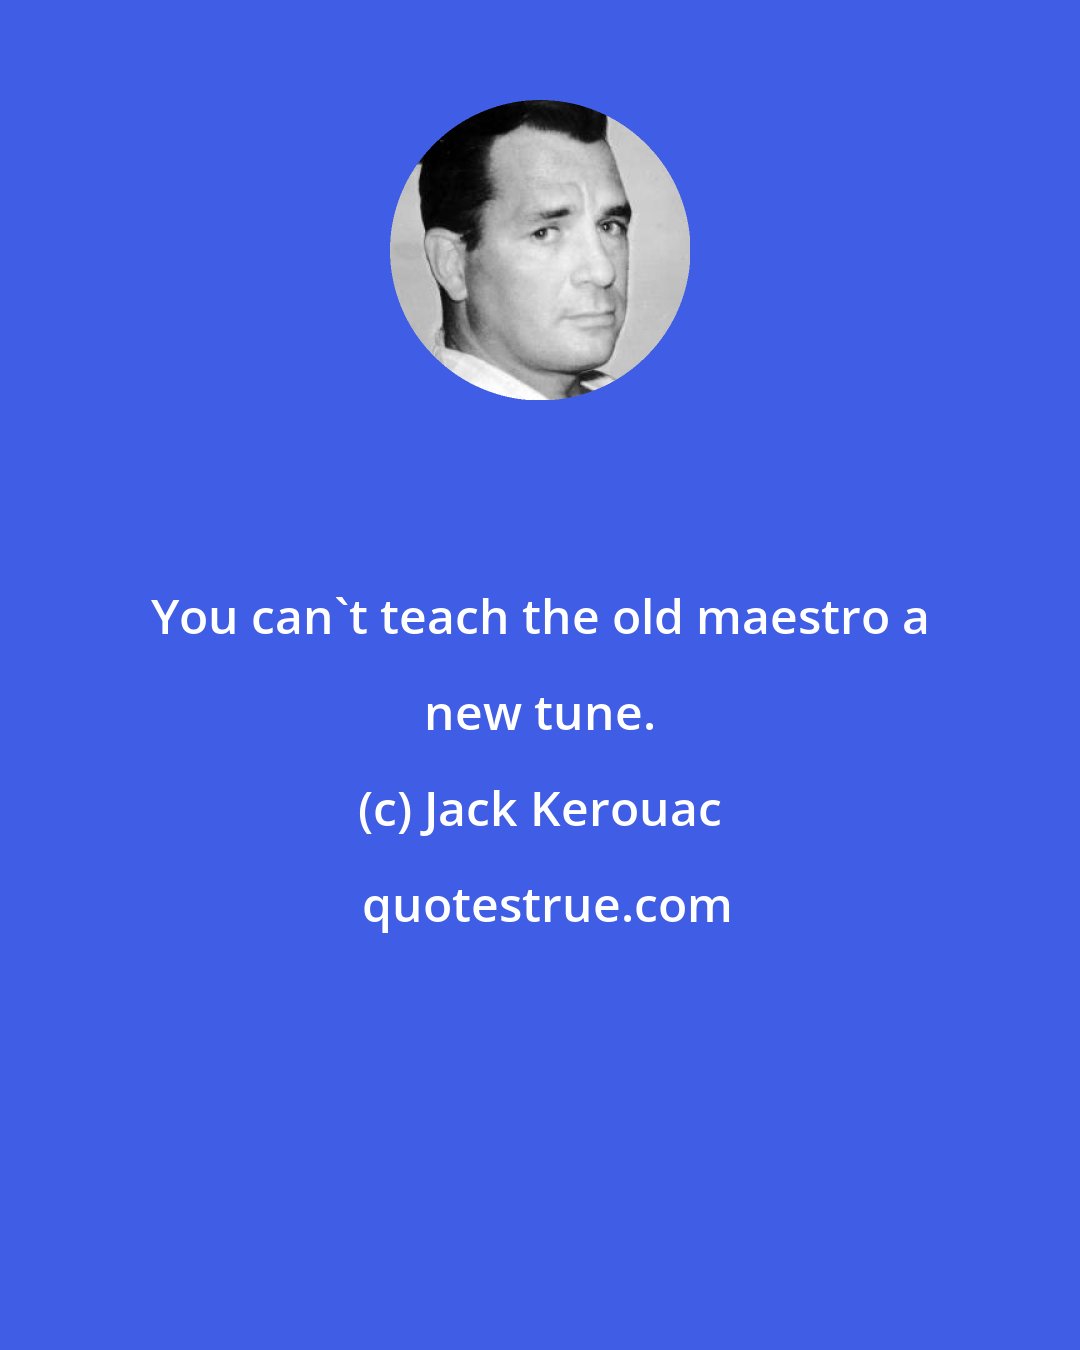 Jack Kerouac: You can't teach the old maestro a new tune.